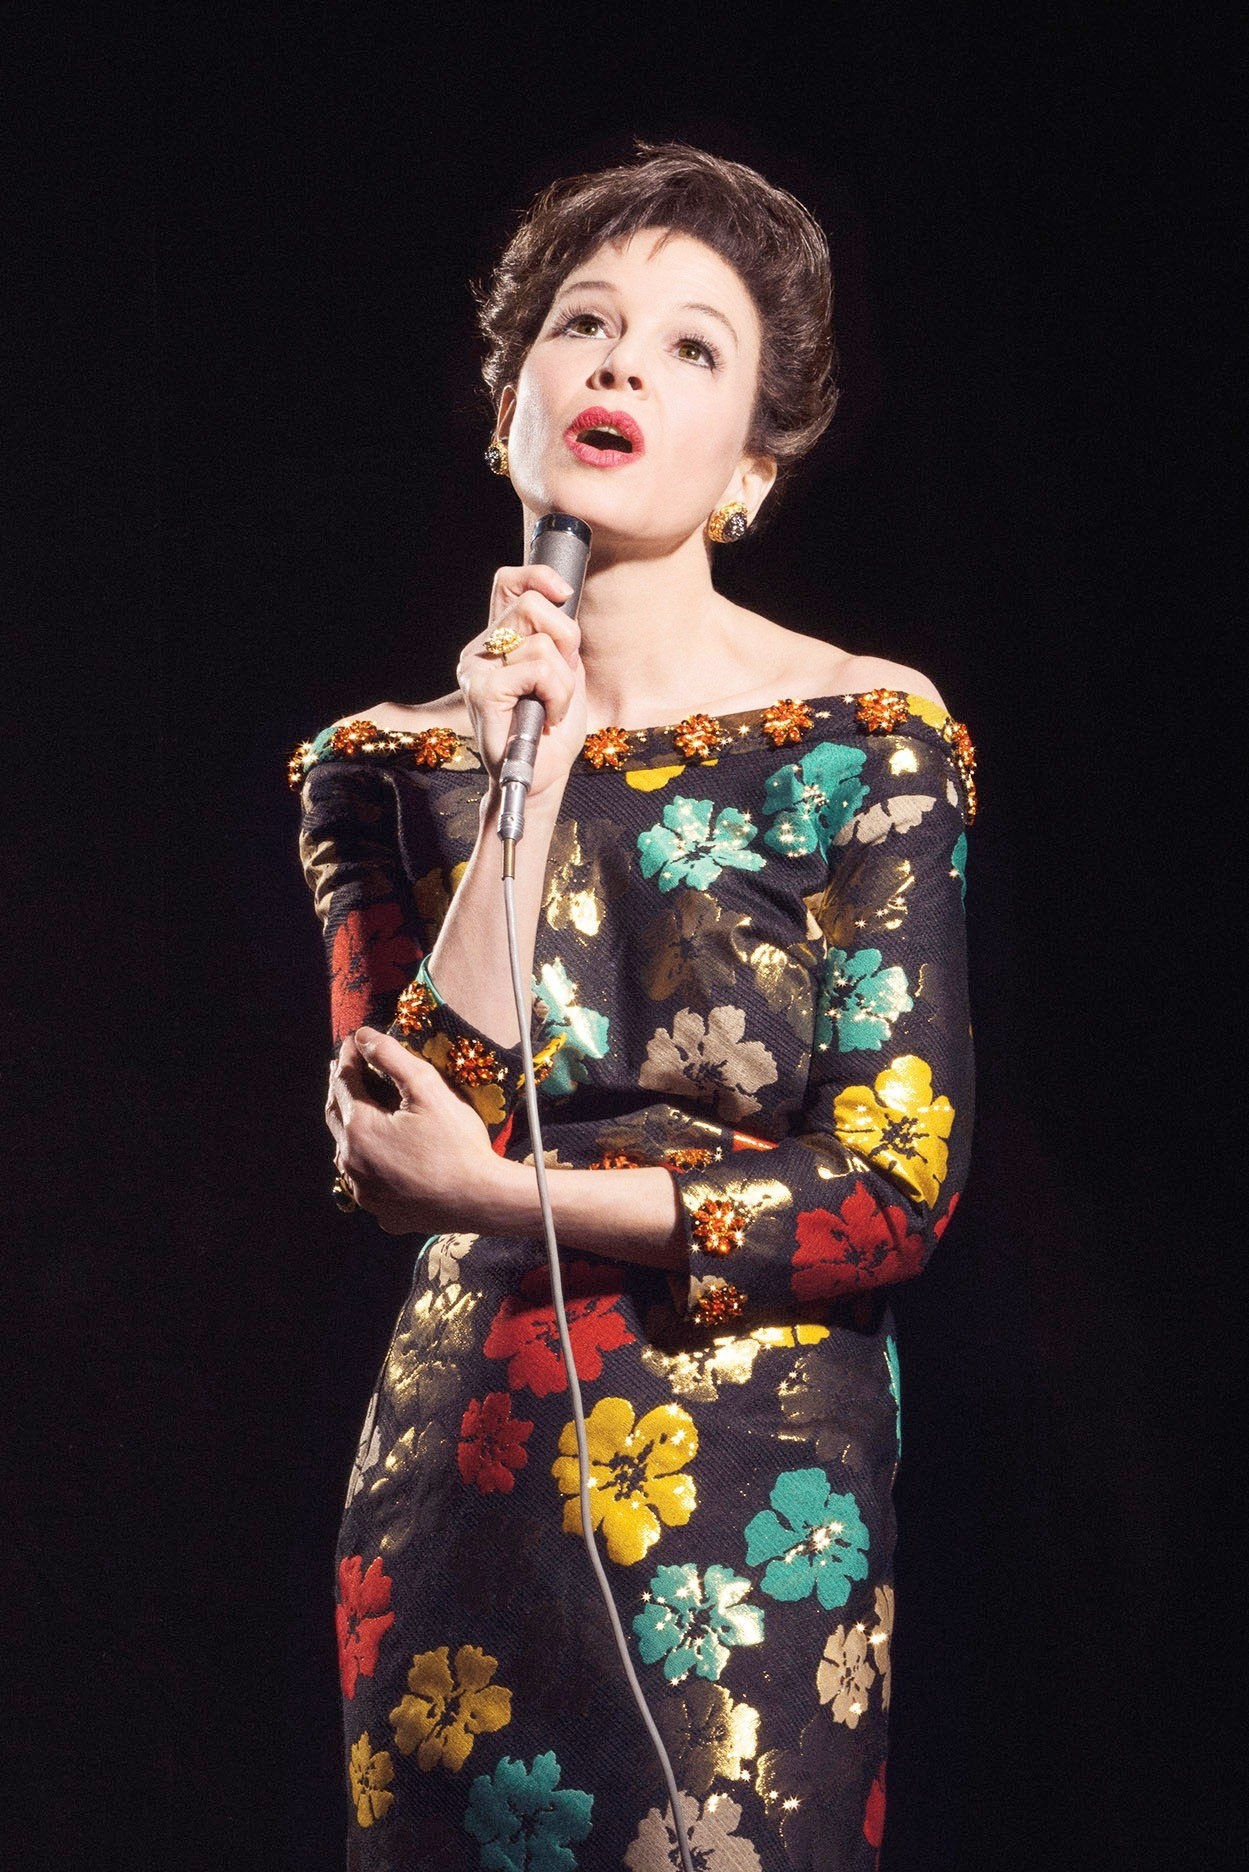 renee in a floral dress with short hair singing